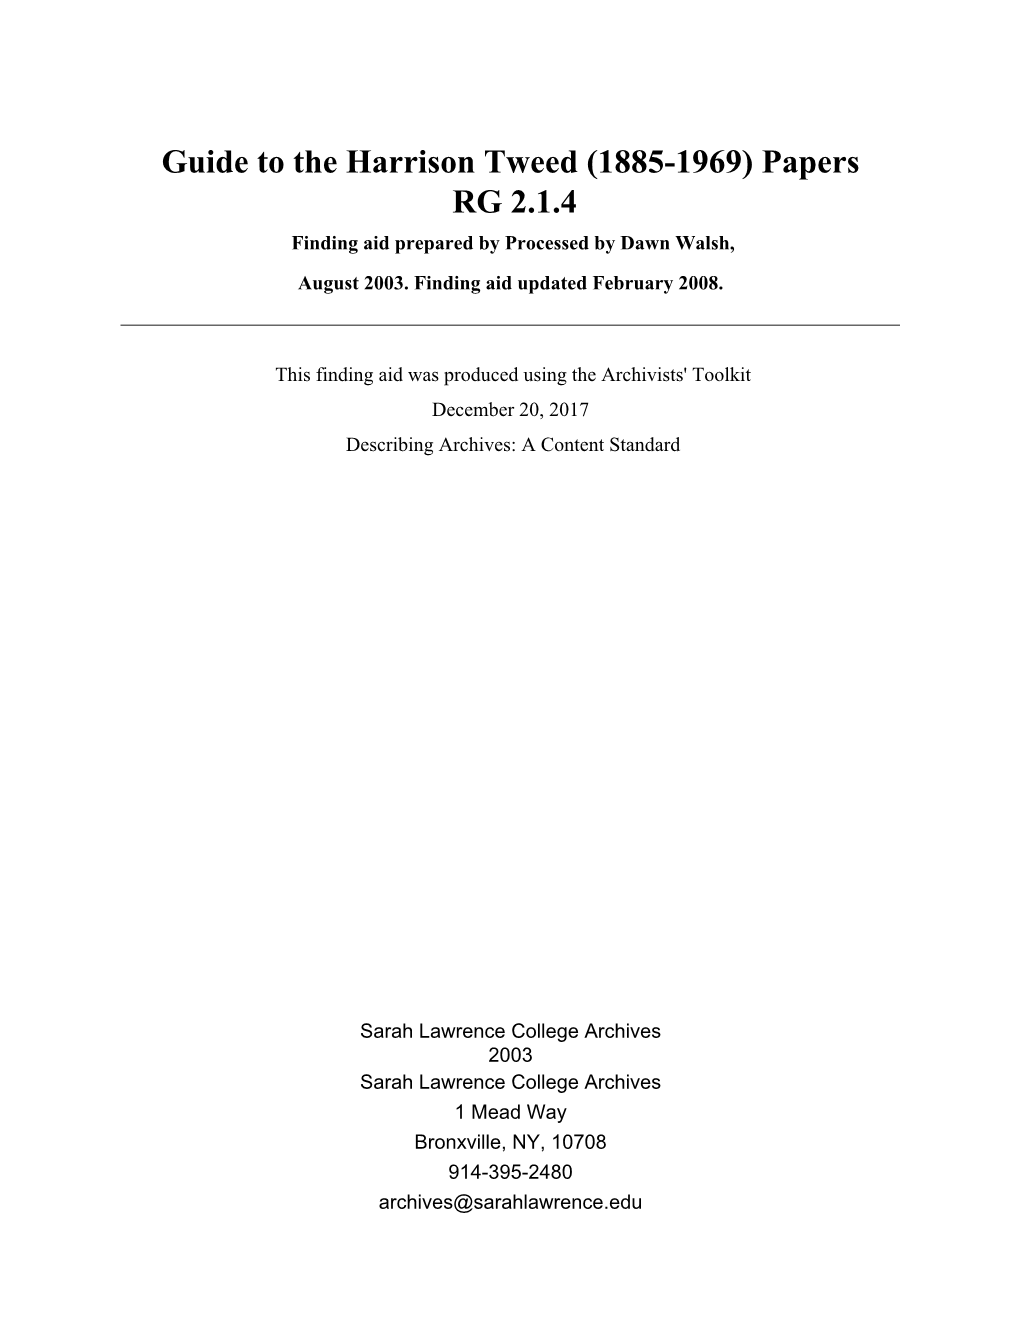 Guide to the Harrison Tweed (1885-1969) Papers RG 2.1.4 Finding Aid Prepared by Processed by Dawn Walsh, August 2003